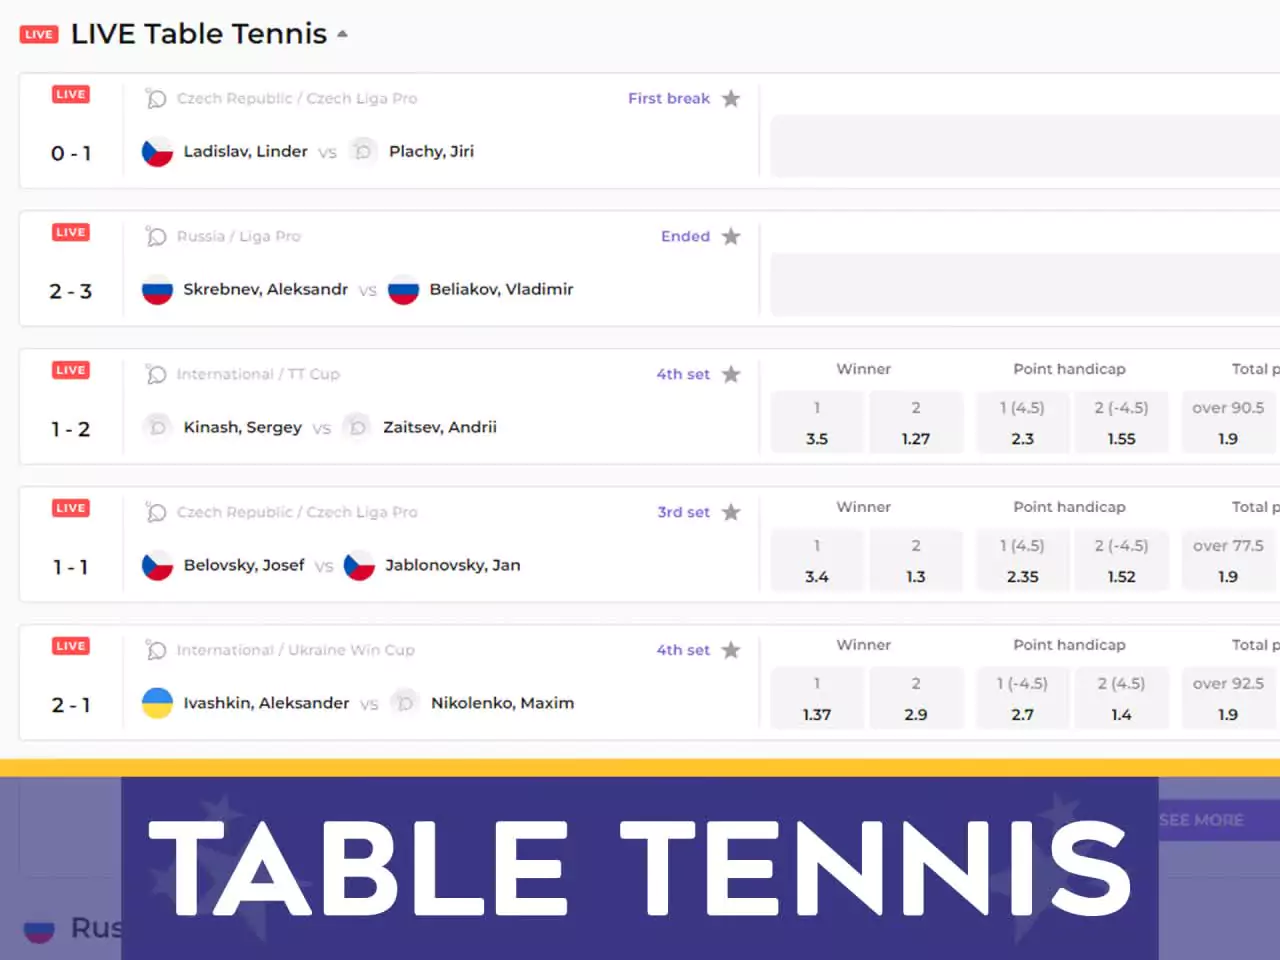 Pick your favorite table tennis player and bet on him.